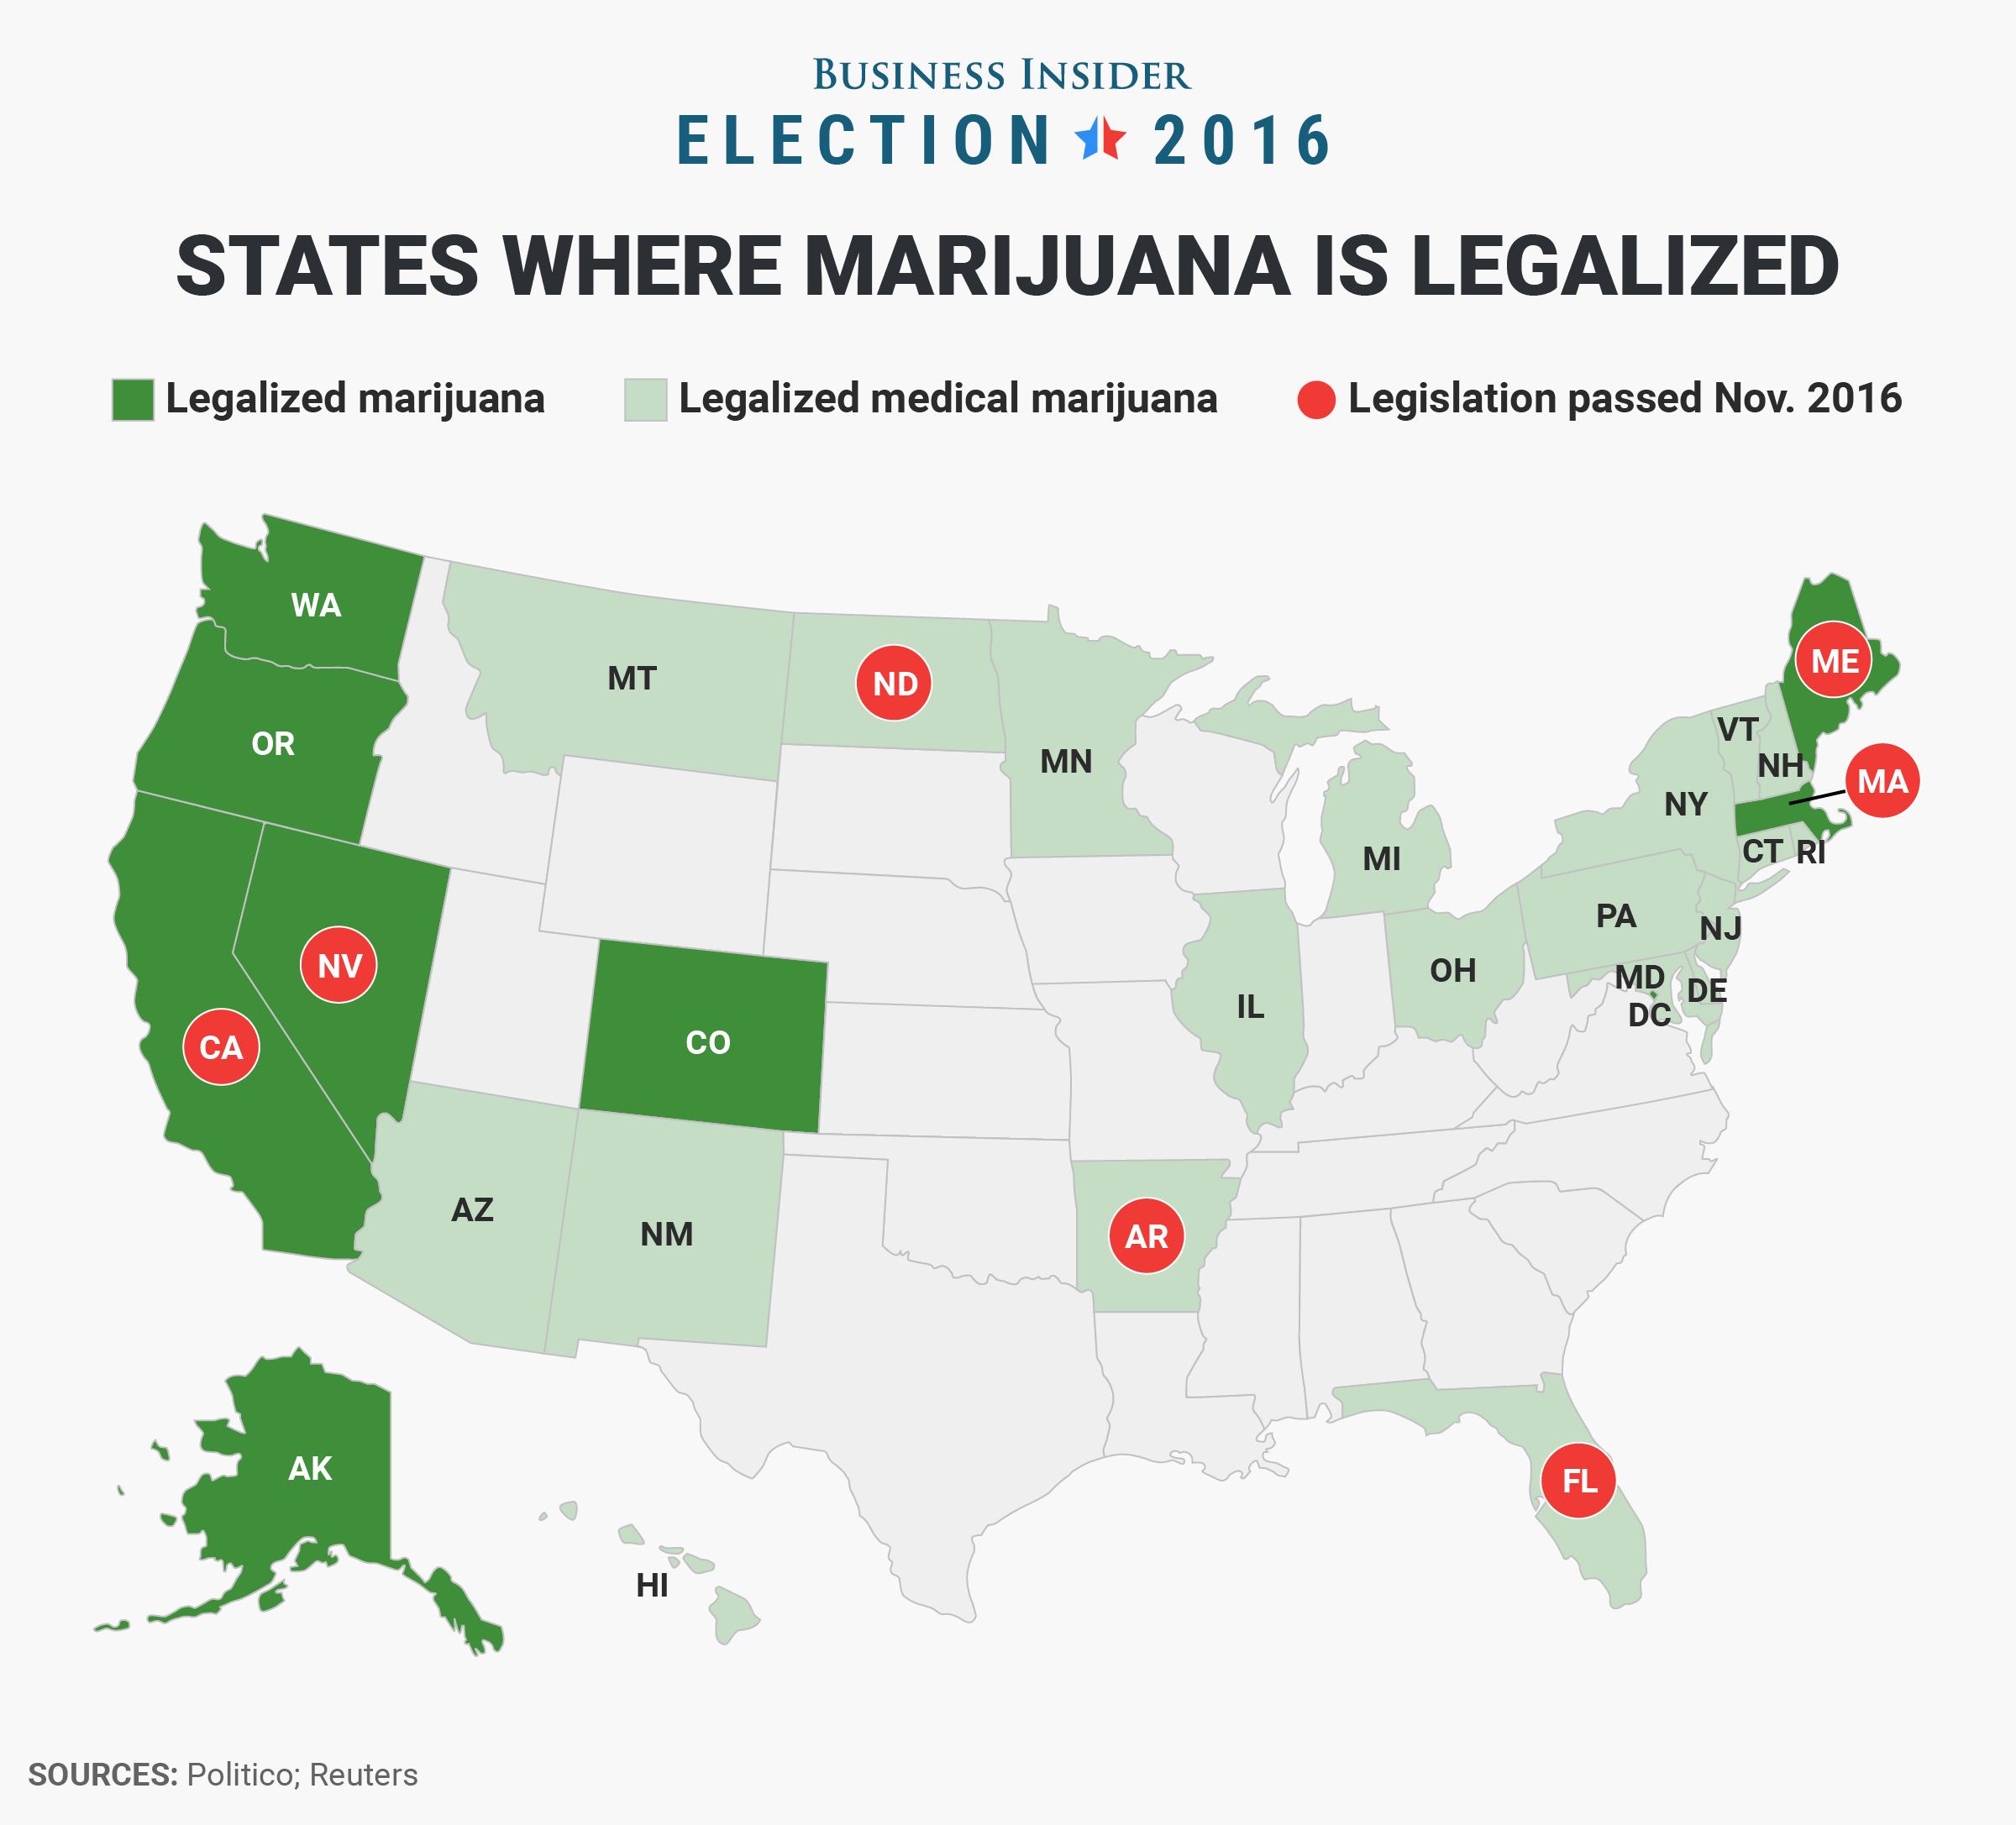 marijuana weed map states legalized medical legal where recreational election state insider business laws federal smoking businessinsider government toke housing